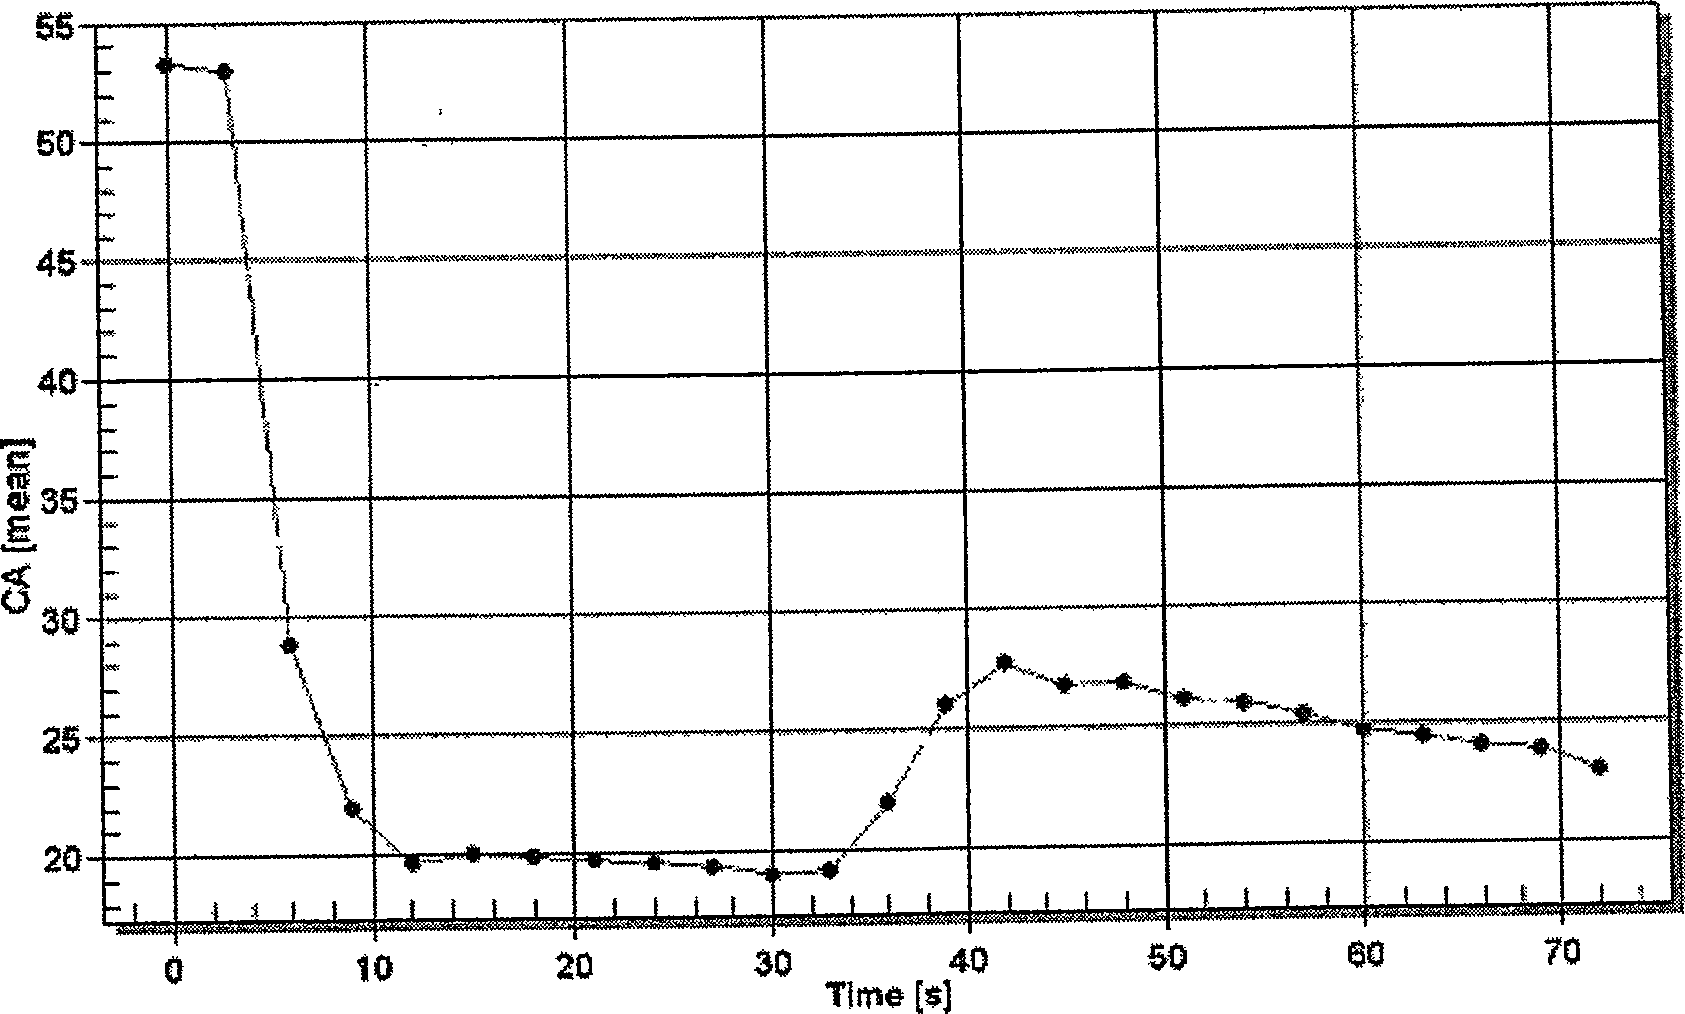 Field electrochemical contact angle measurment method based on micronano interface